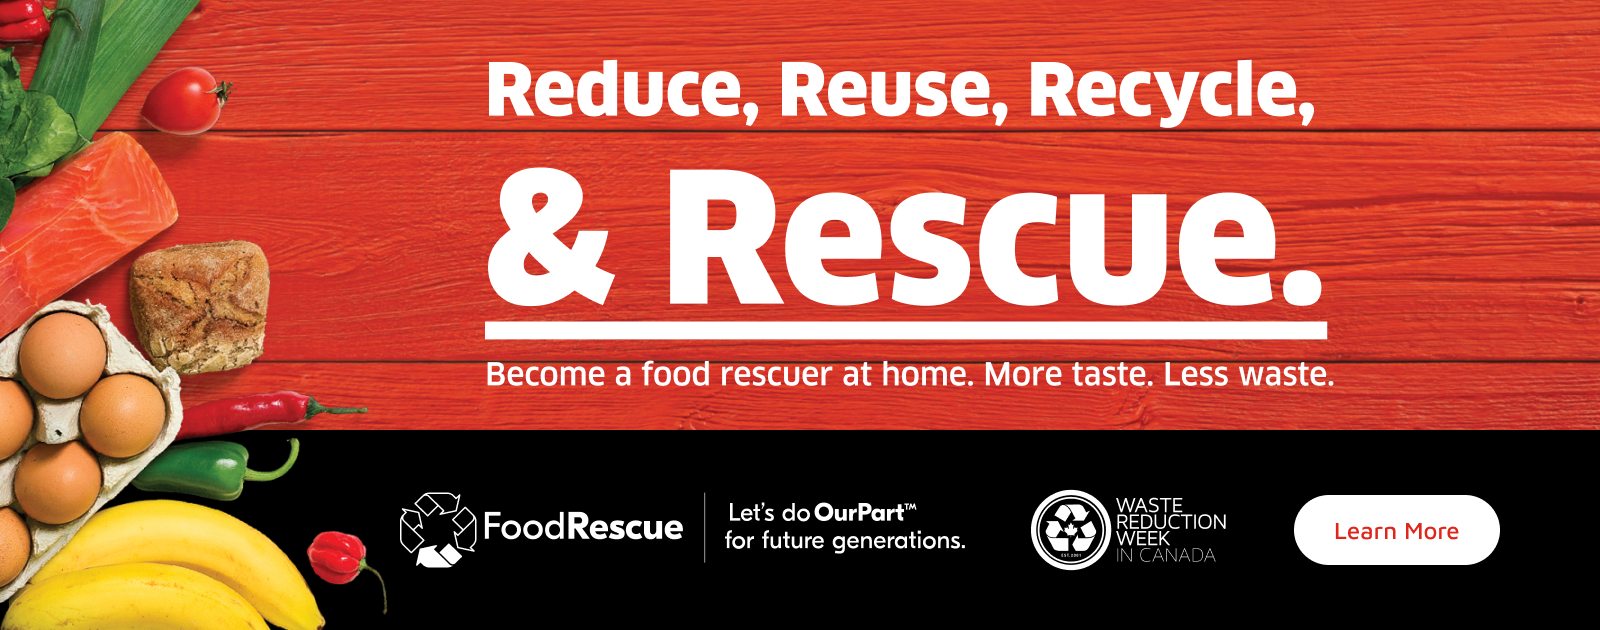 Text Reading 'Reduce, Reuse, Recycle, & Rescue. Become a food rescuer at home. More taste, less waste. Let's do OurPart™ for future generations. 'Learn More' by clicking the button below.'